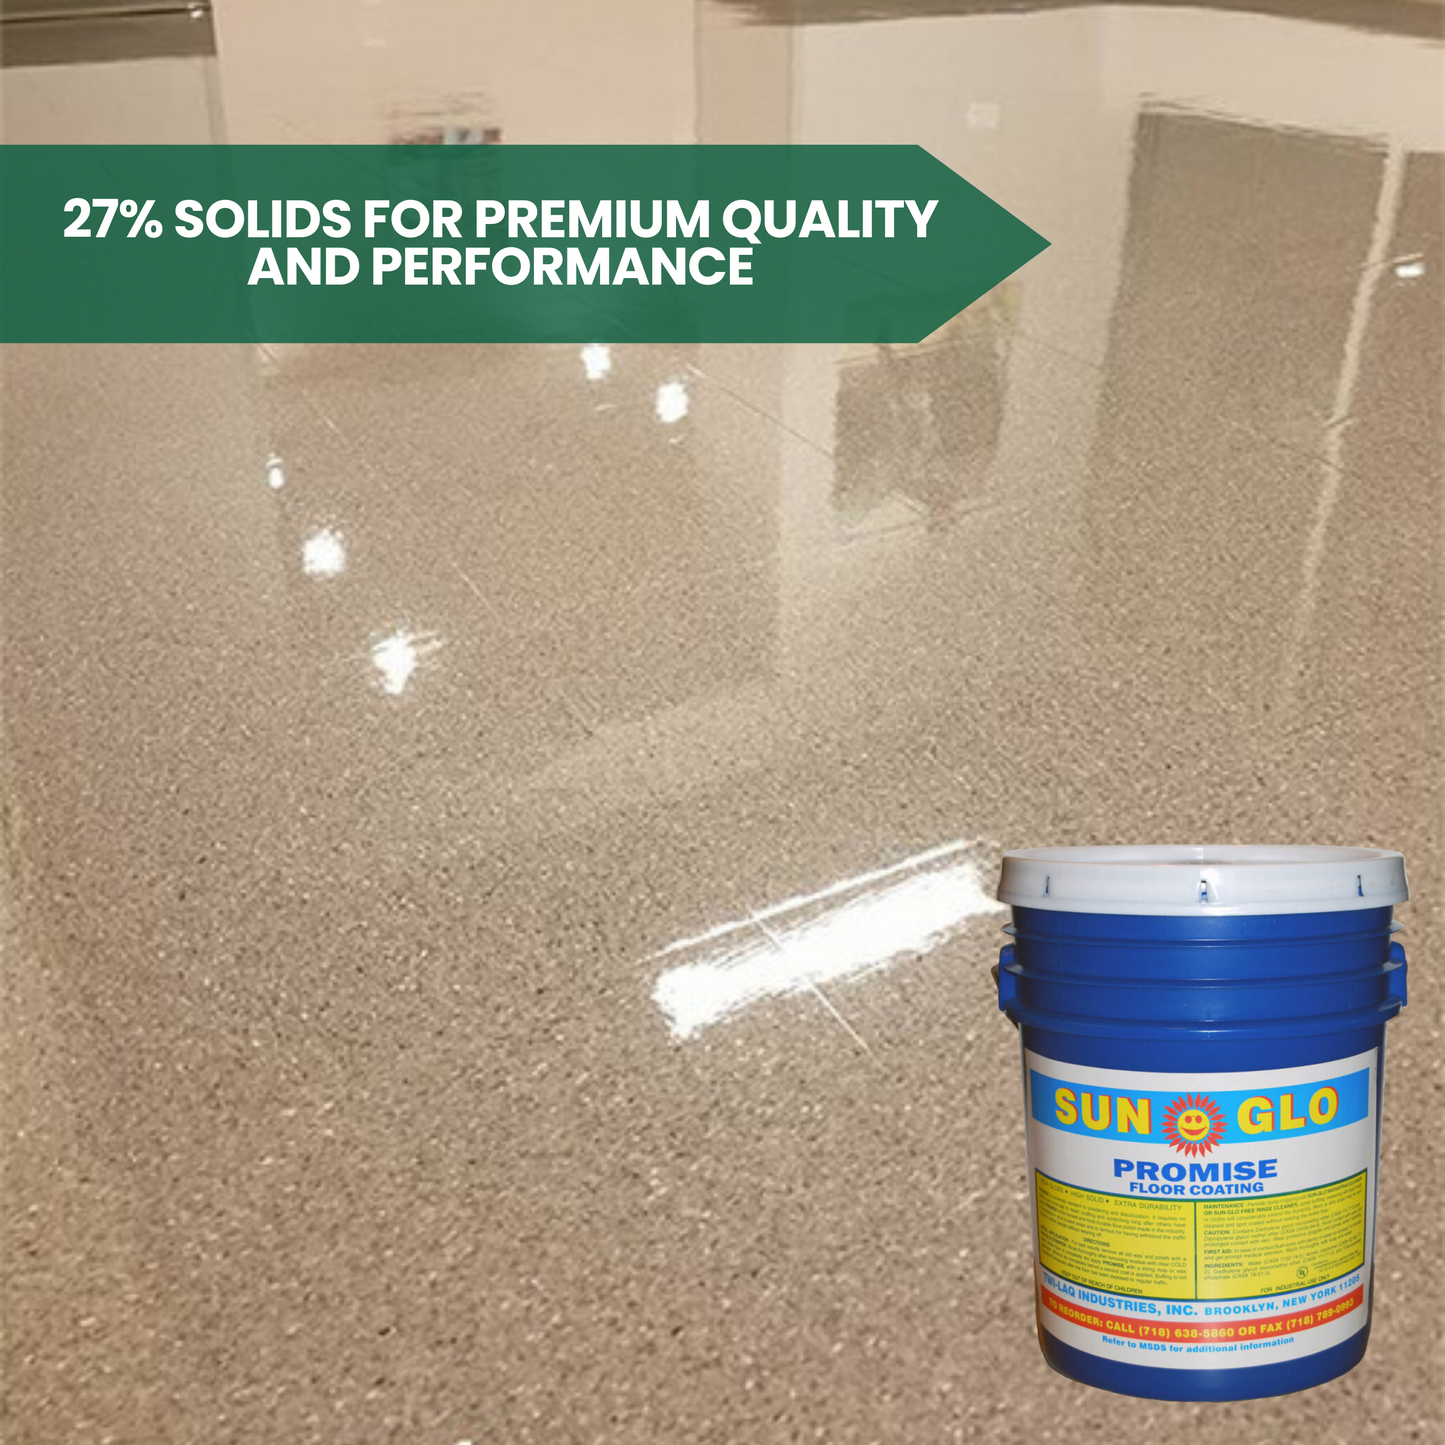 SUN-GLO Promise - High-Gloss Floor Finish - Proven Excellence & Safety for Over 50 Years (5 Gallon Pail)